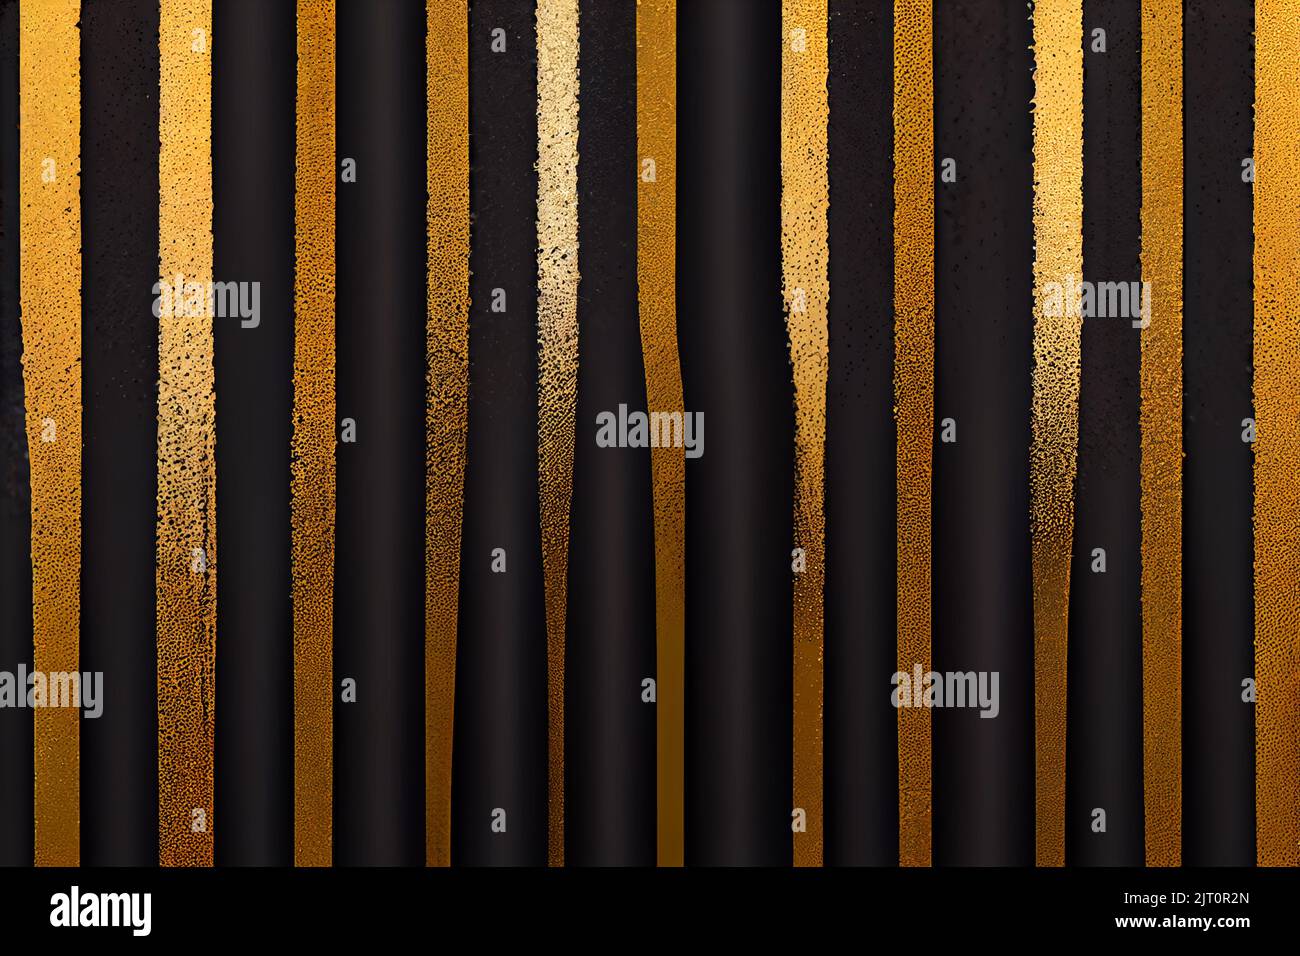 Stripe Pattern of Black and Golden fabric Stock Photo